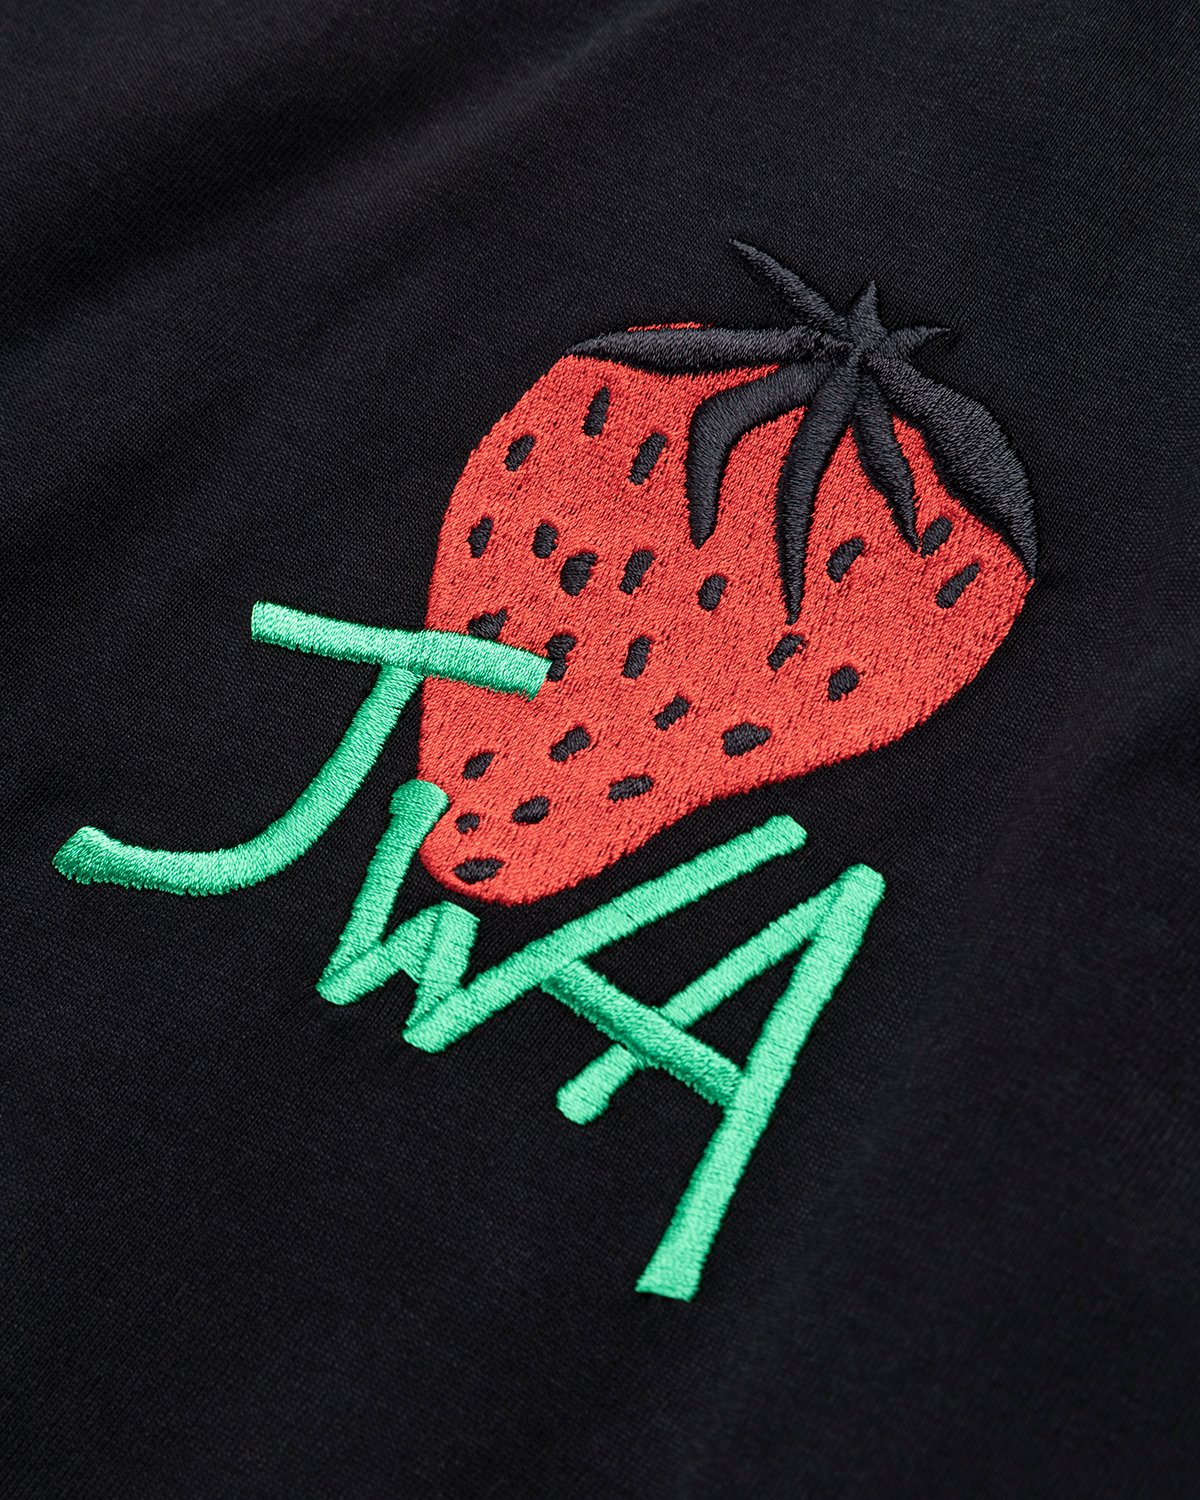 J.W. Anderson - Embroidered Strawberry JWA T-Shirt Black - Clothing - Black - Image 4